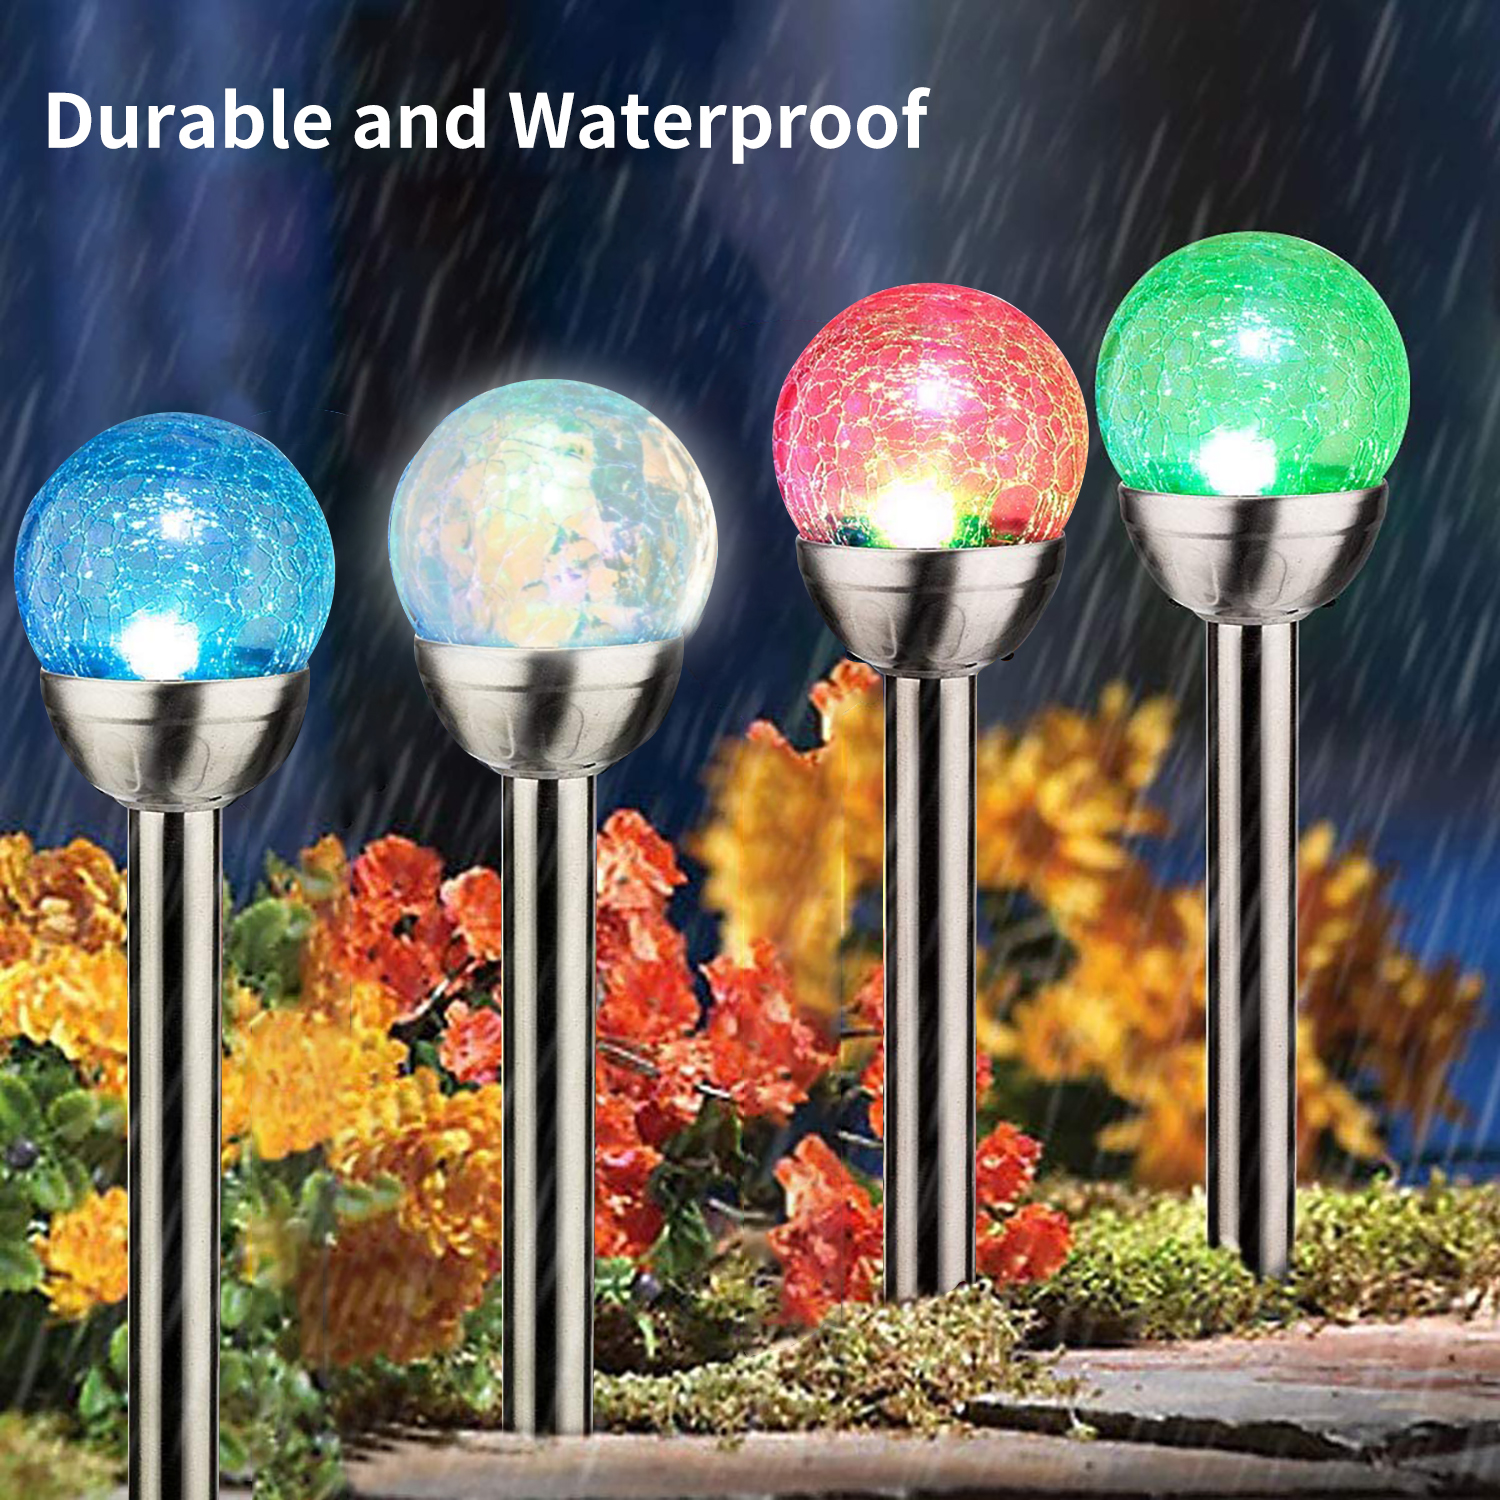 Color Changing Solar Landscape Lights, Waterproof Cracked Glass Ball LED Solar  Garden Lights for Outdoor Patio Lawn Yard Walkway Decoration Pcs 